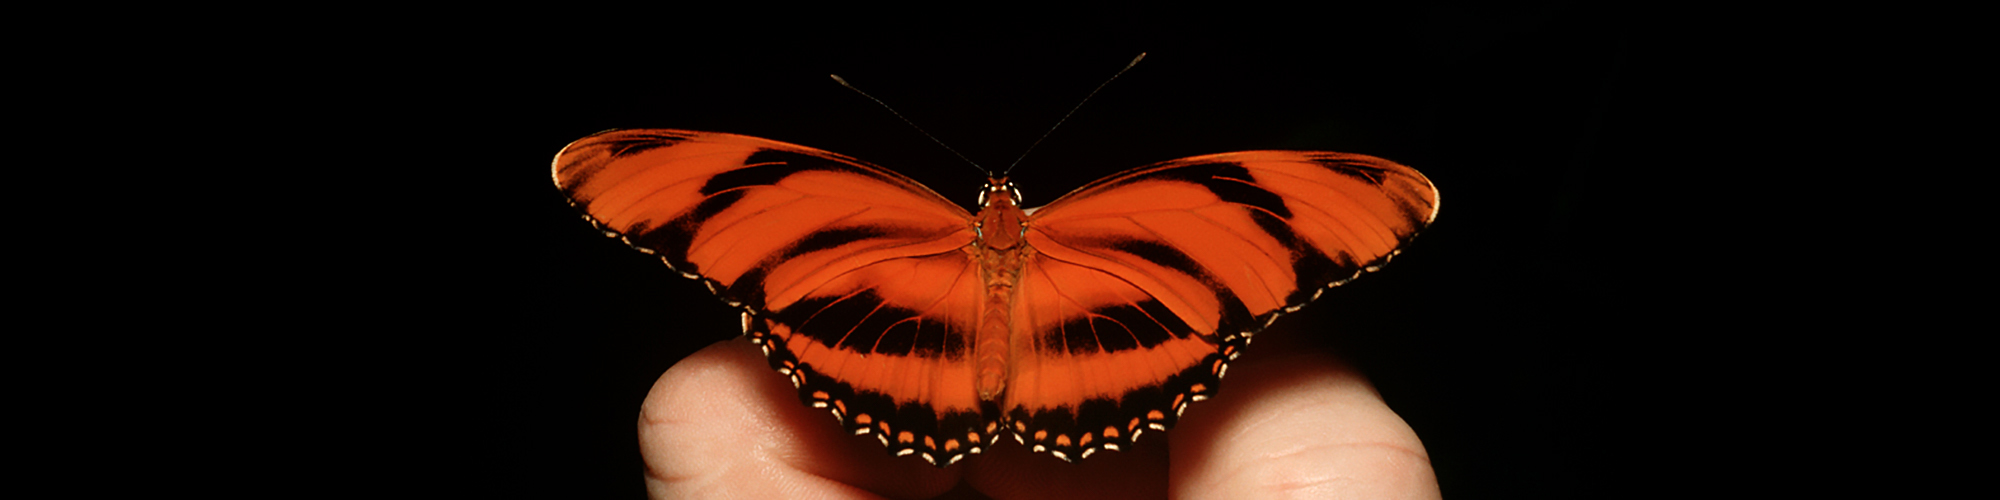 orange and black butterfly sitting on fingers